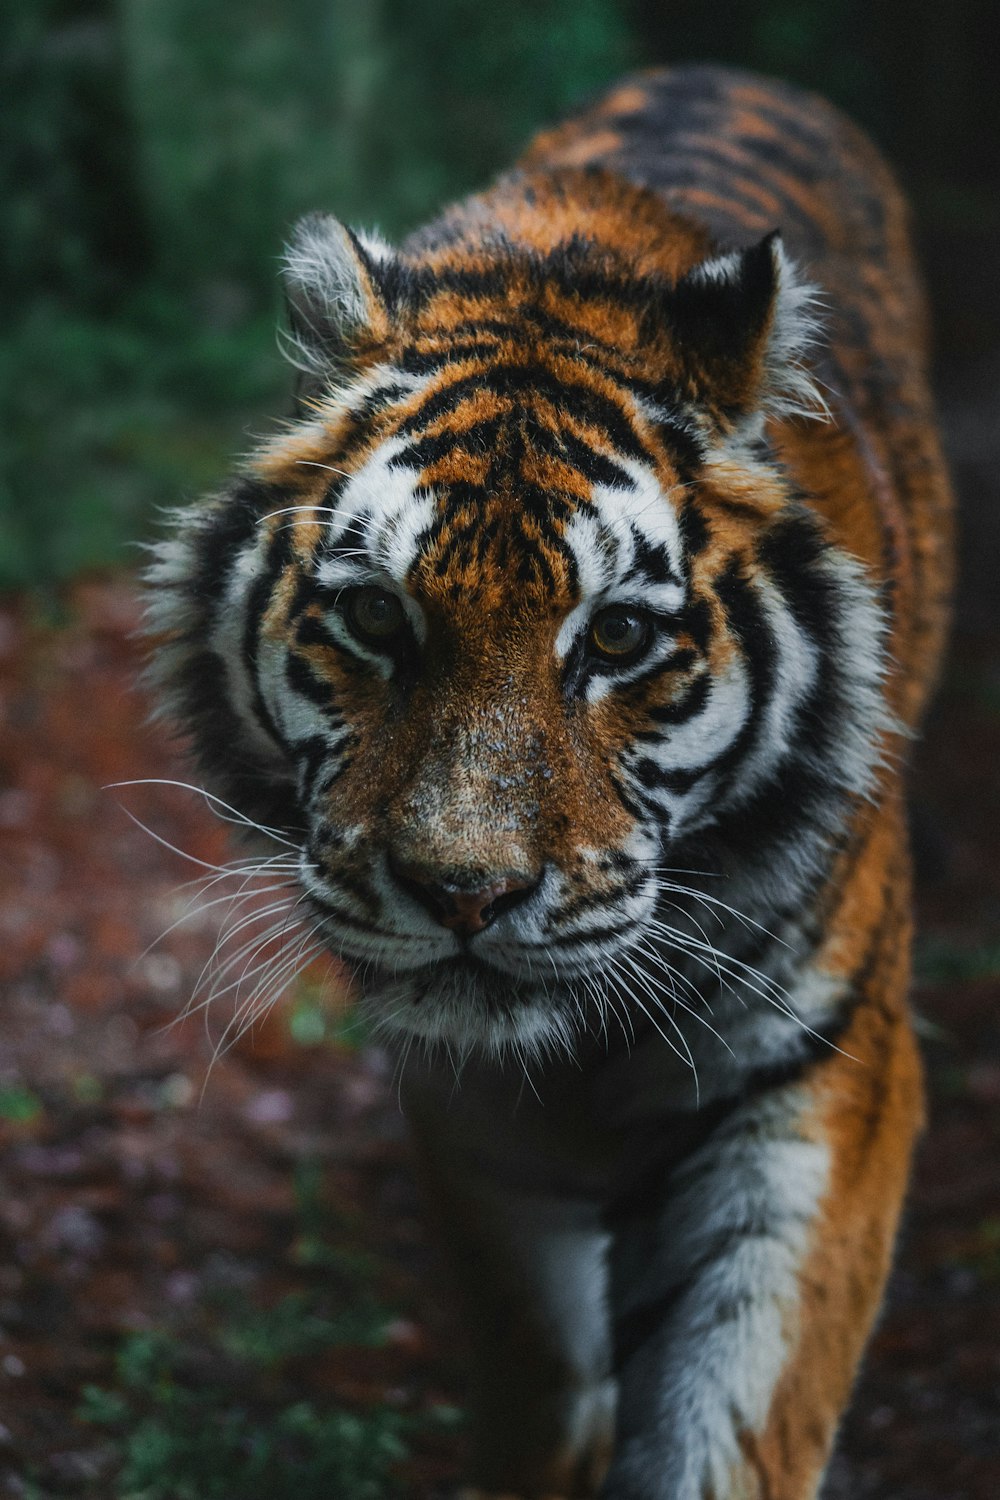 a close up of a tiger walking on a trail